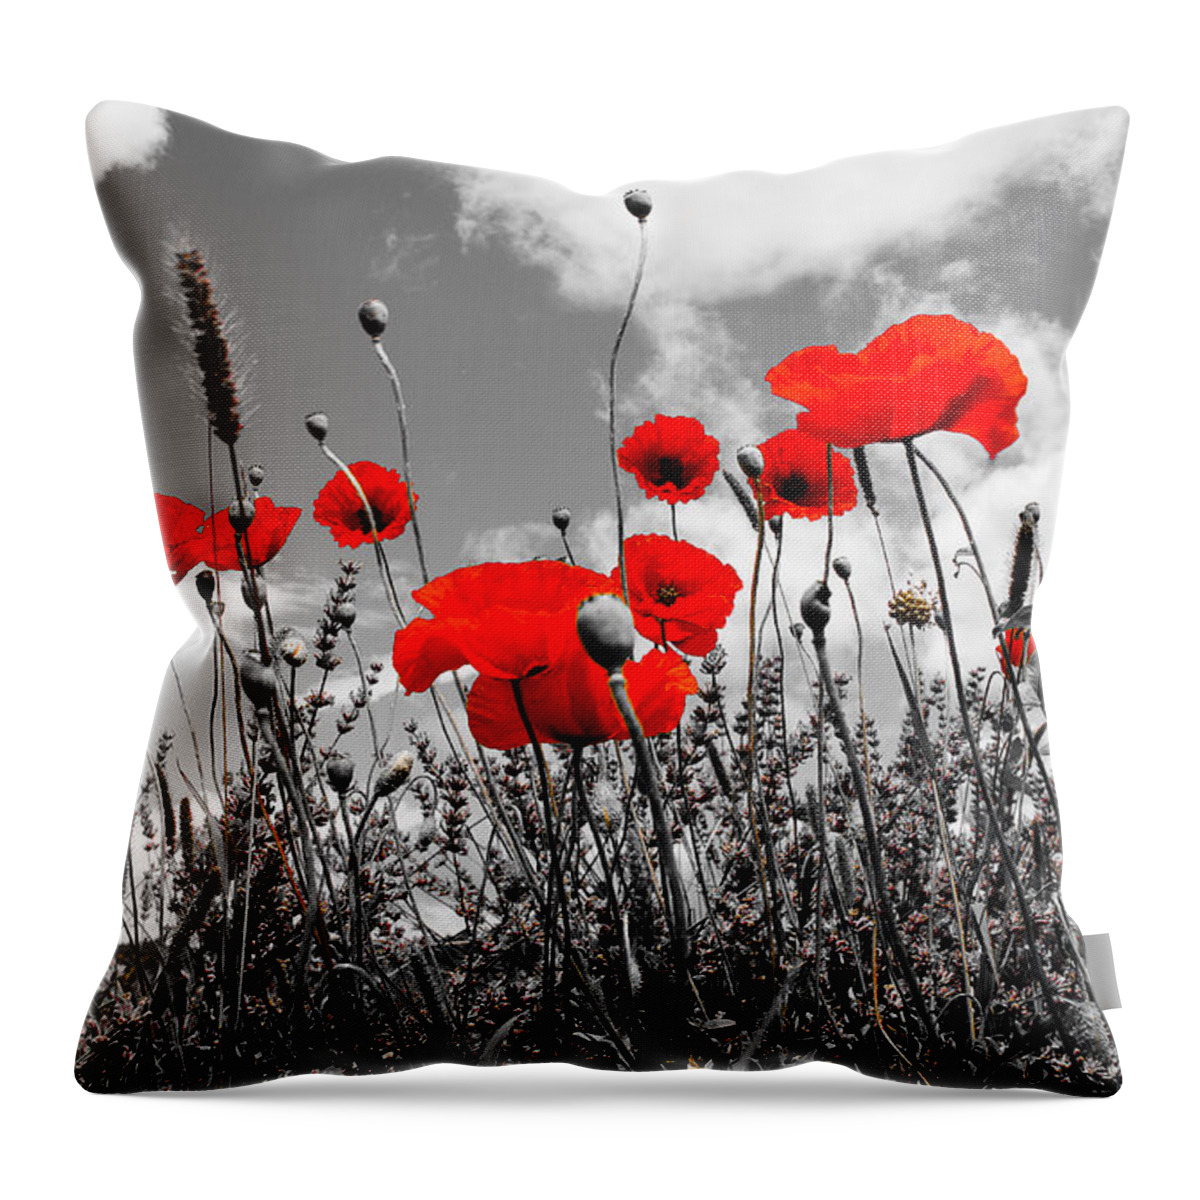 Red Poppies On White And Black Background Throw Pillow featuring the photograph Red Poppies on black and white background by Dany Lison